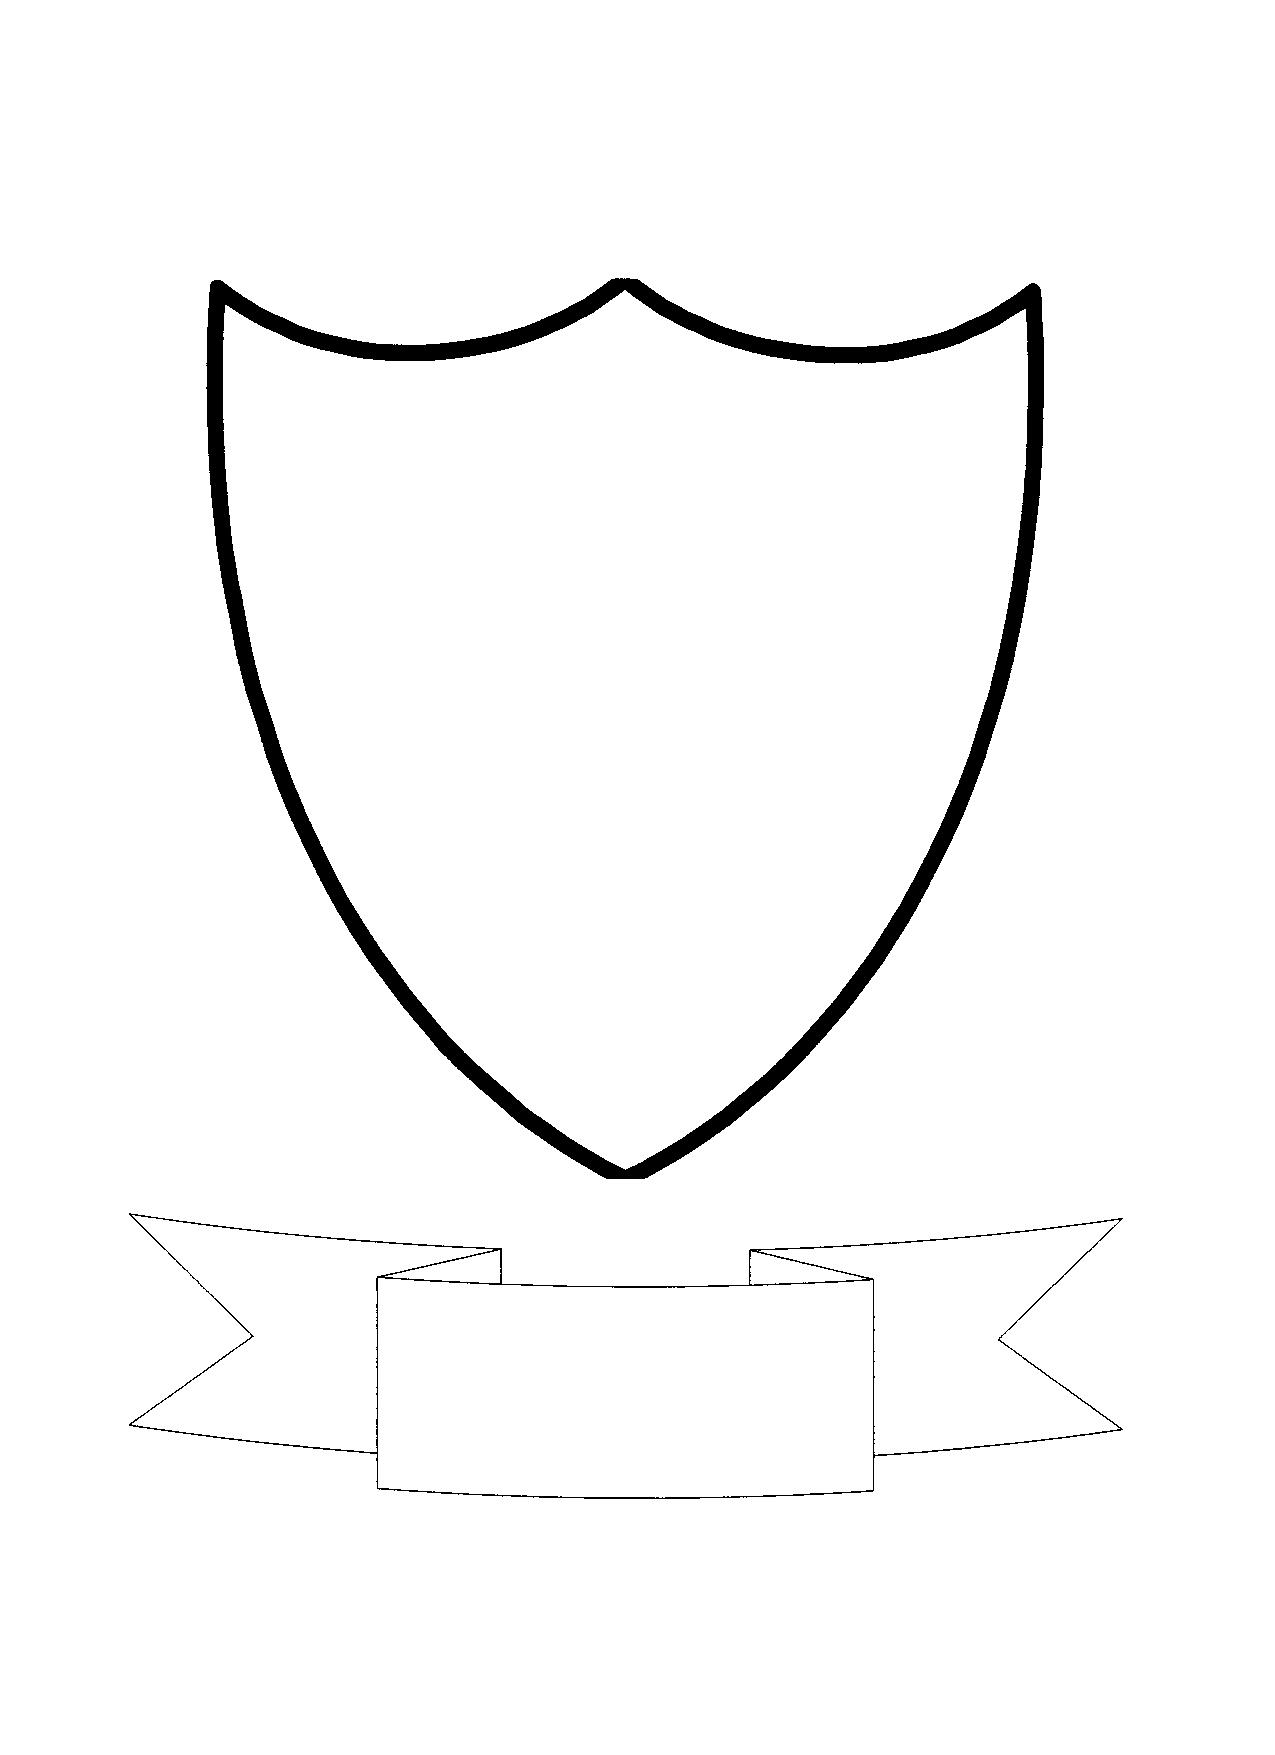 Free Blank Crest Template, Download Free Blank Crest Template png